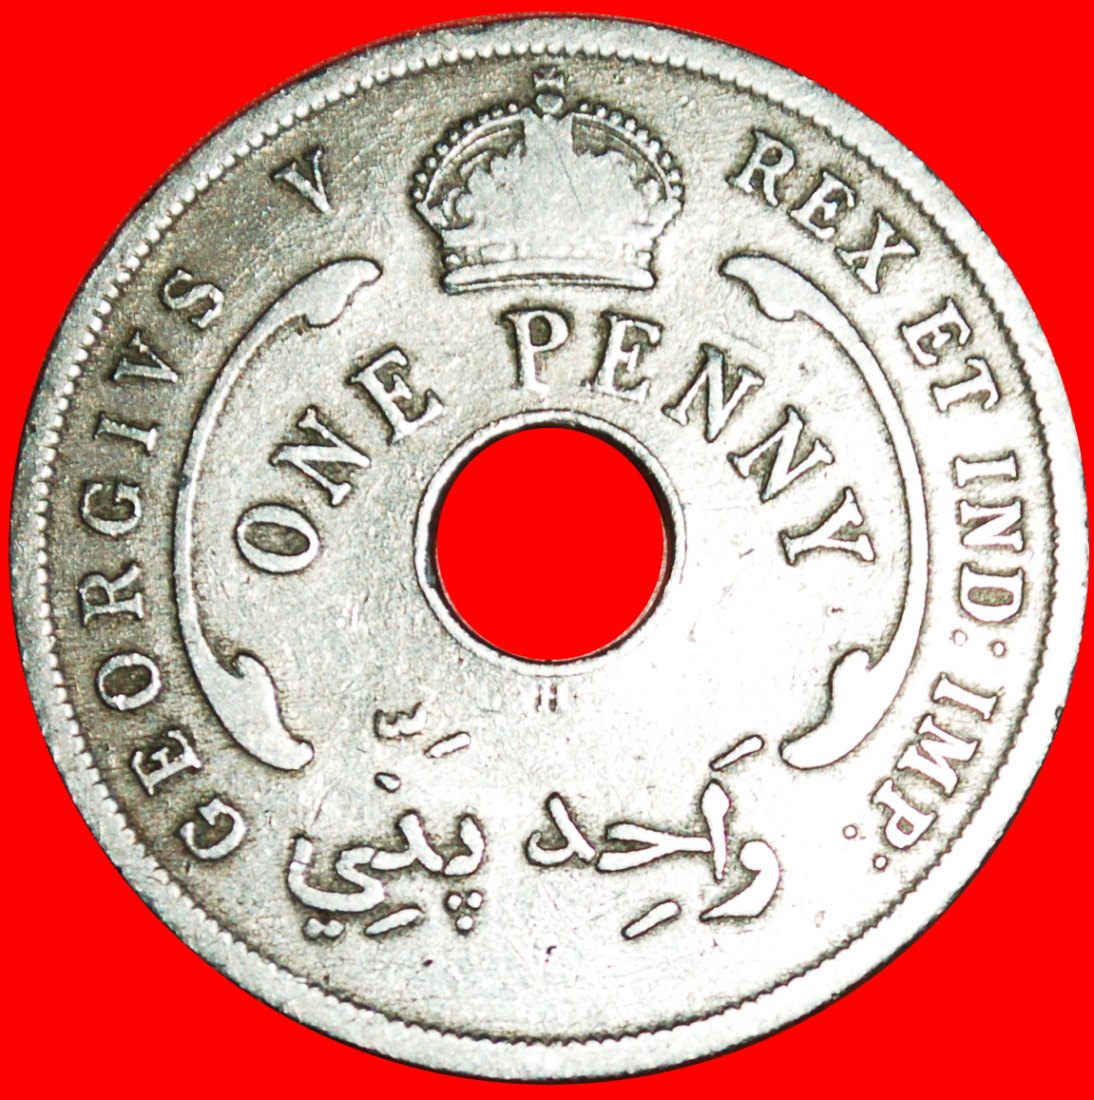  * GREAT BRITAIN: BRITISH WEST AFRICA ★1 PENNY 1920H★GEORGE V (1911-1936) LOW START ★ NO RESERVE!   